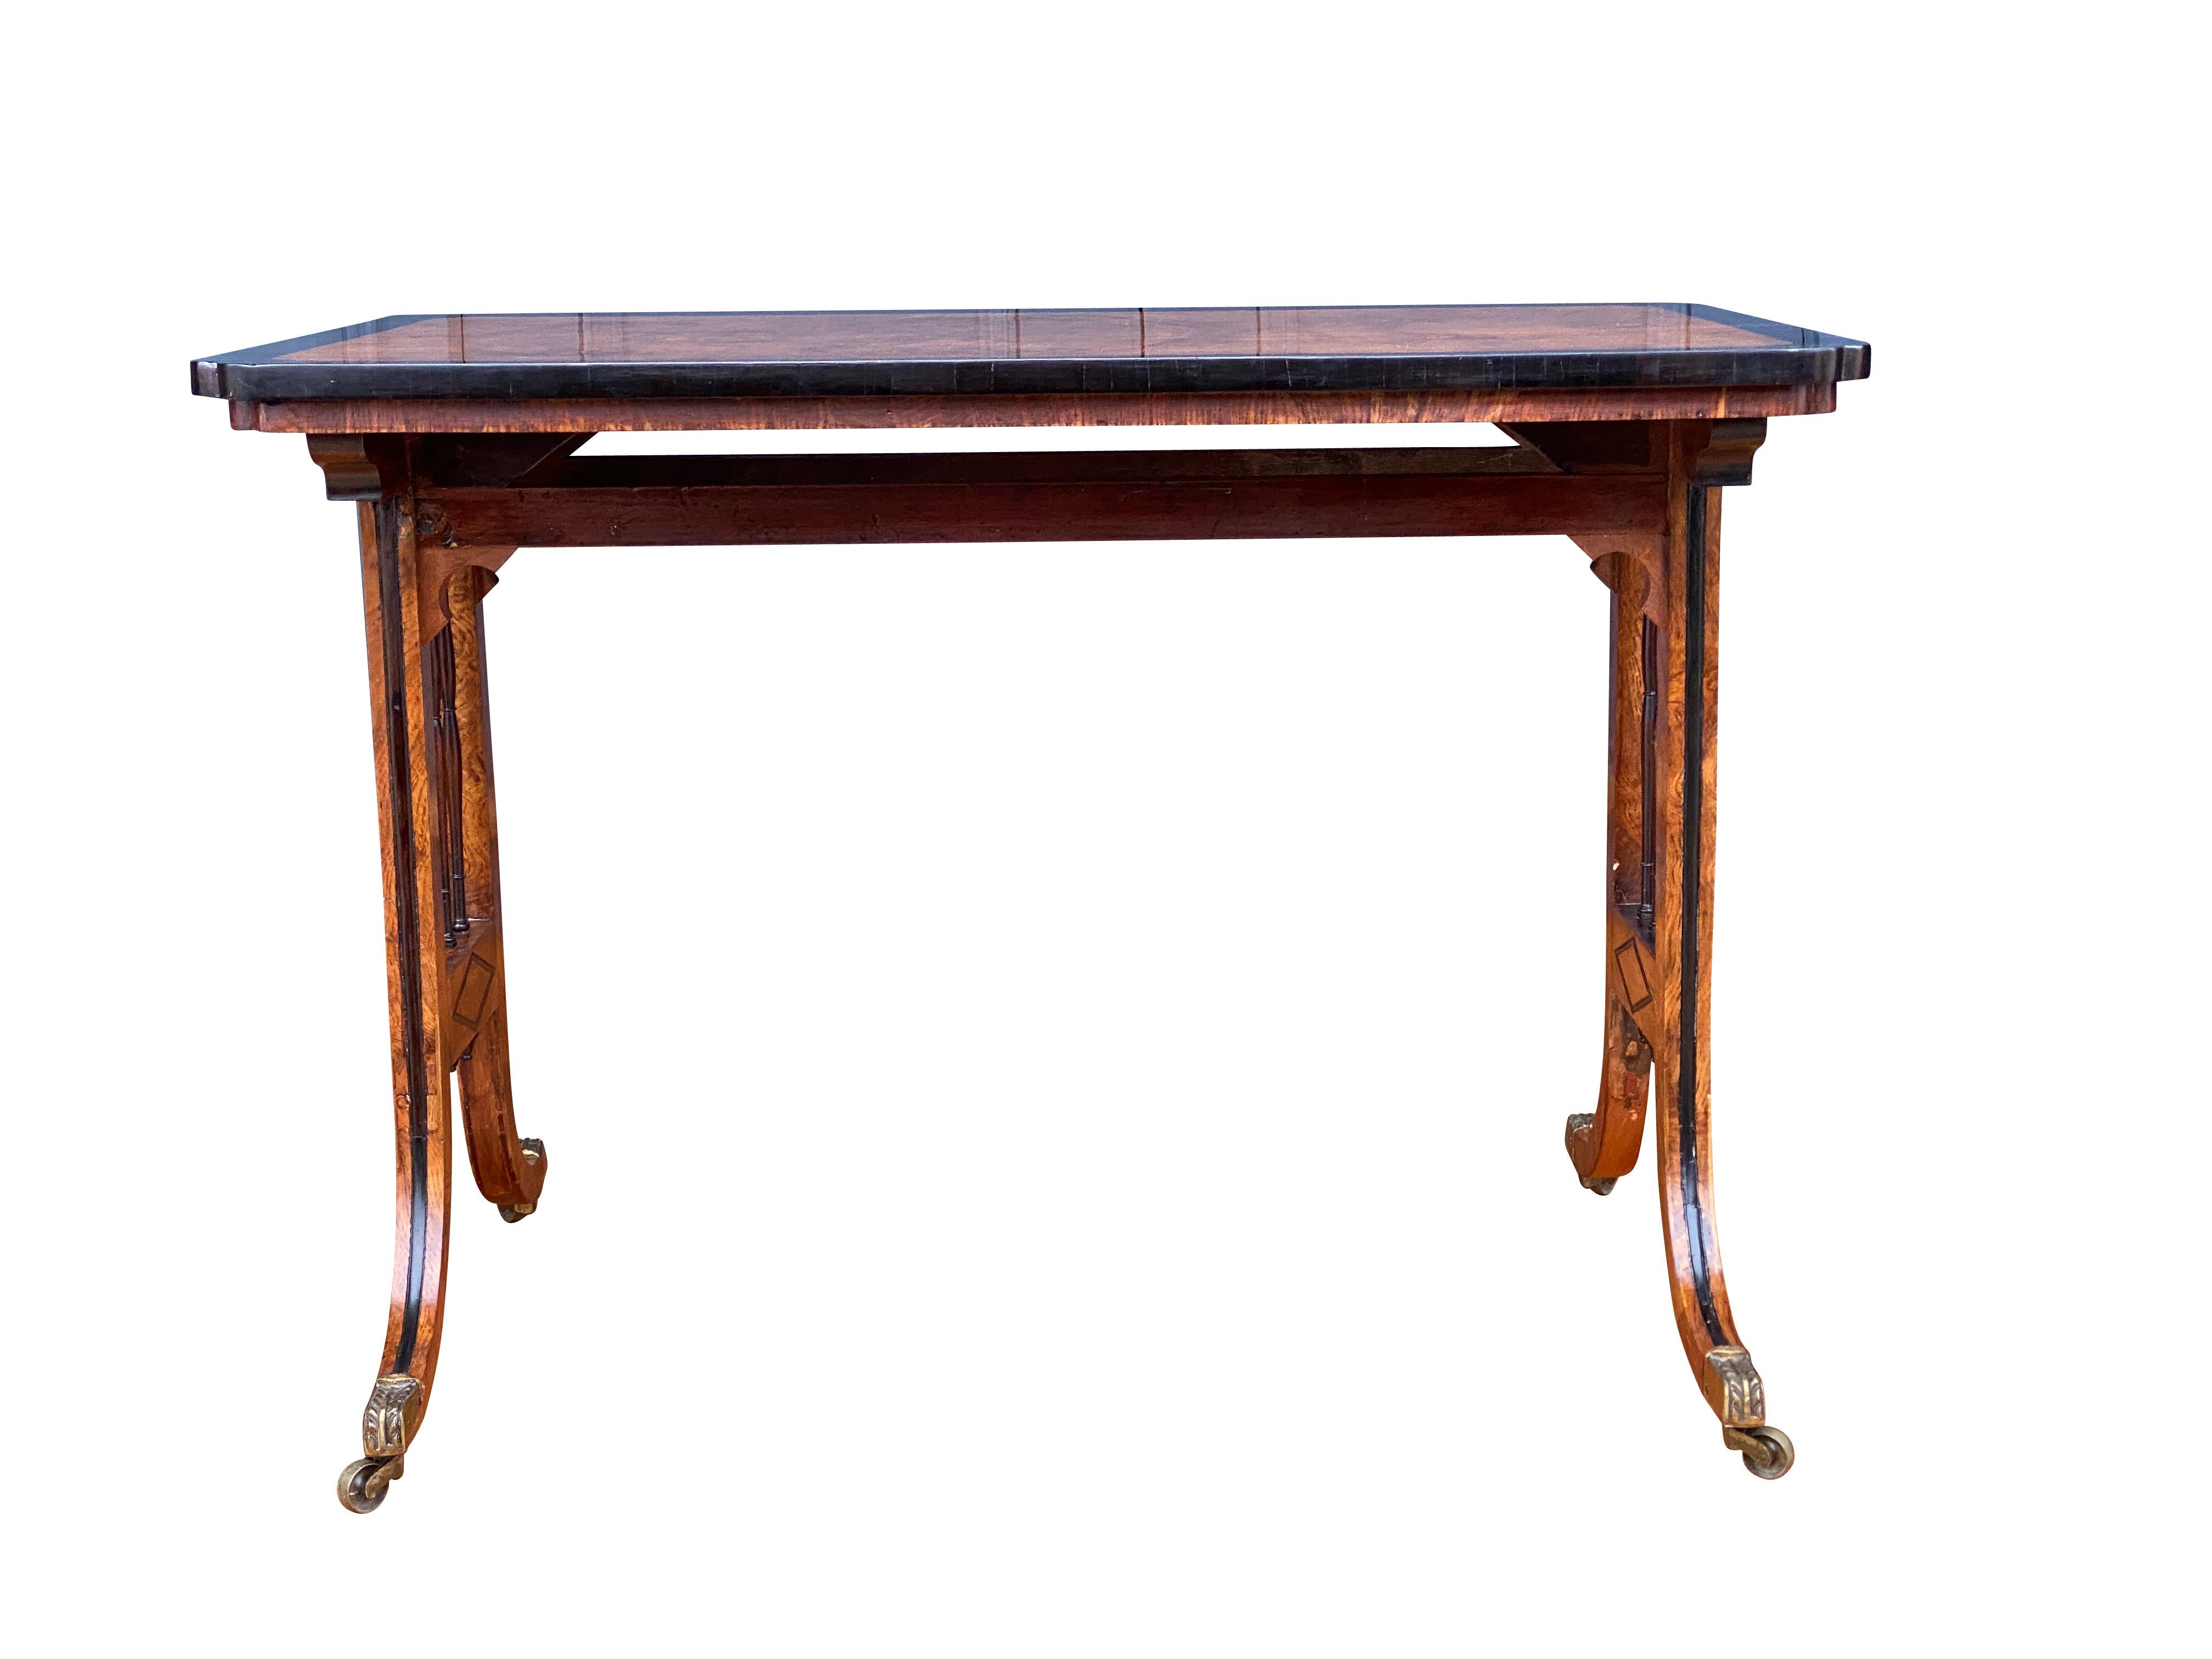 Figured wood top with crossbanded edge raised on trestle ends with spindles and diamond form applied molding, carved legs with brass casters. Almost identical example in 